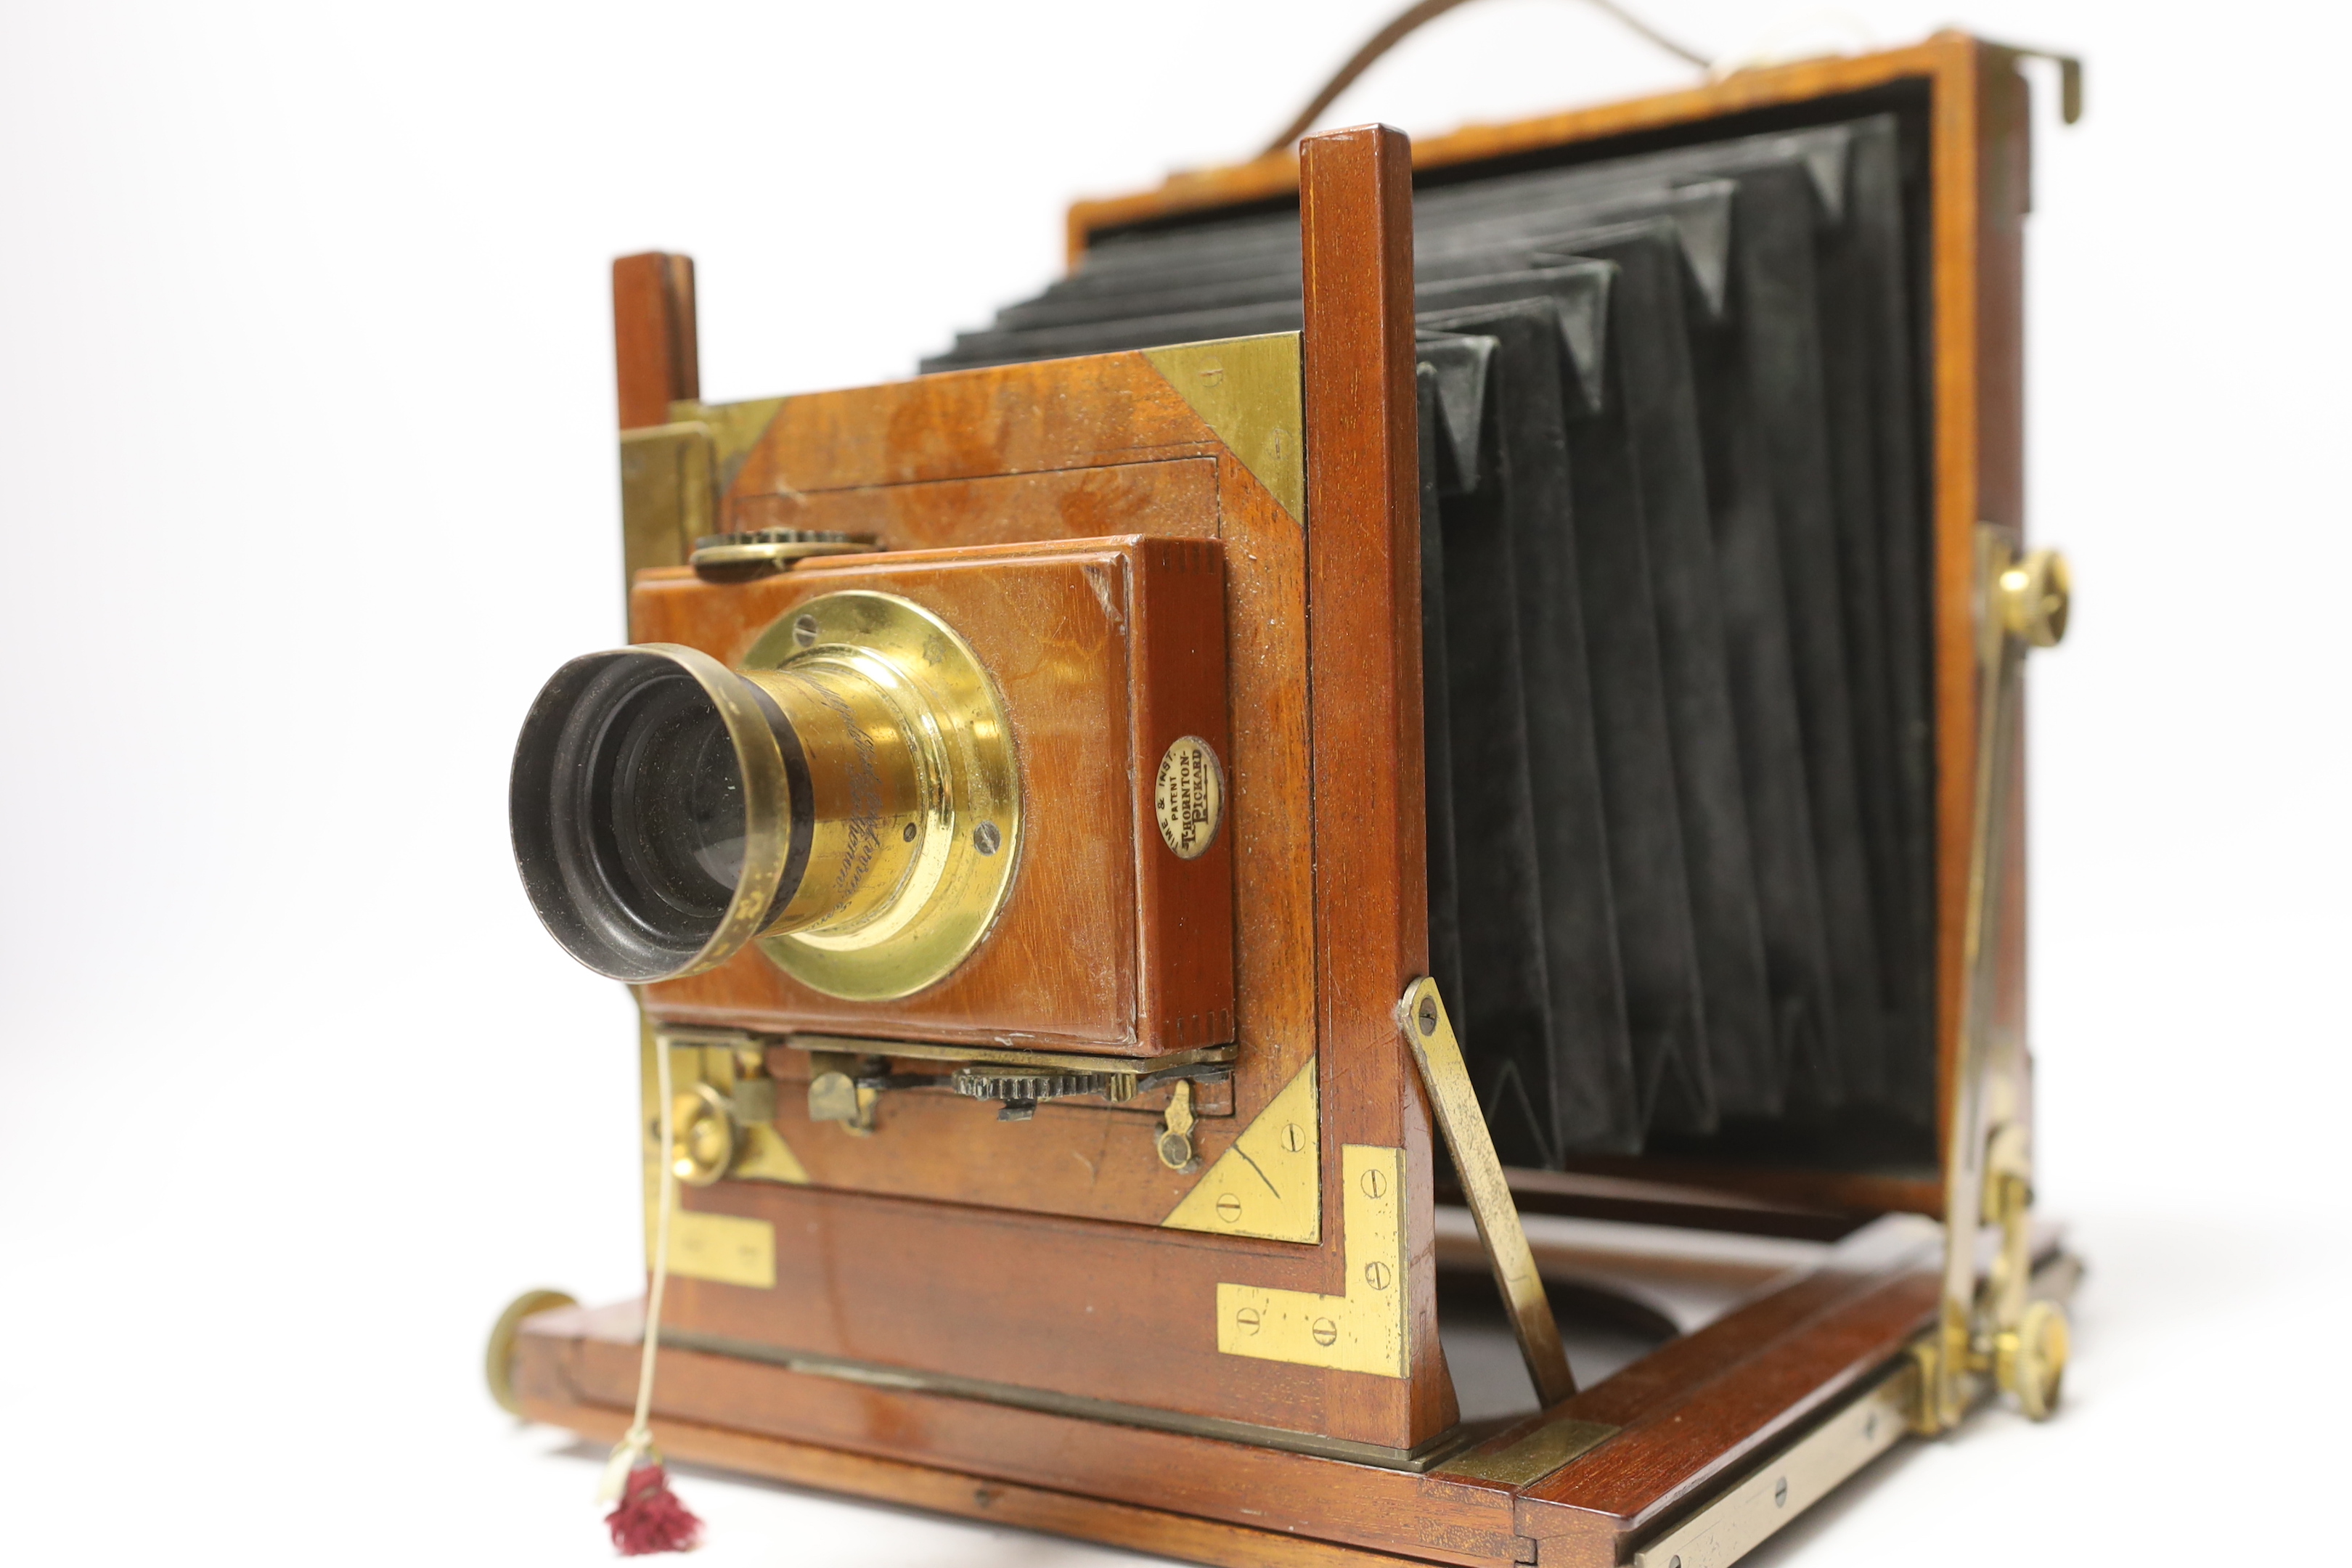 A late nineteenth century brass and mahogany half plate bellows camera with a lens and a shutter action by Thornton Pickard